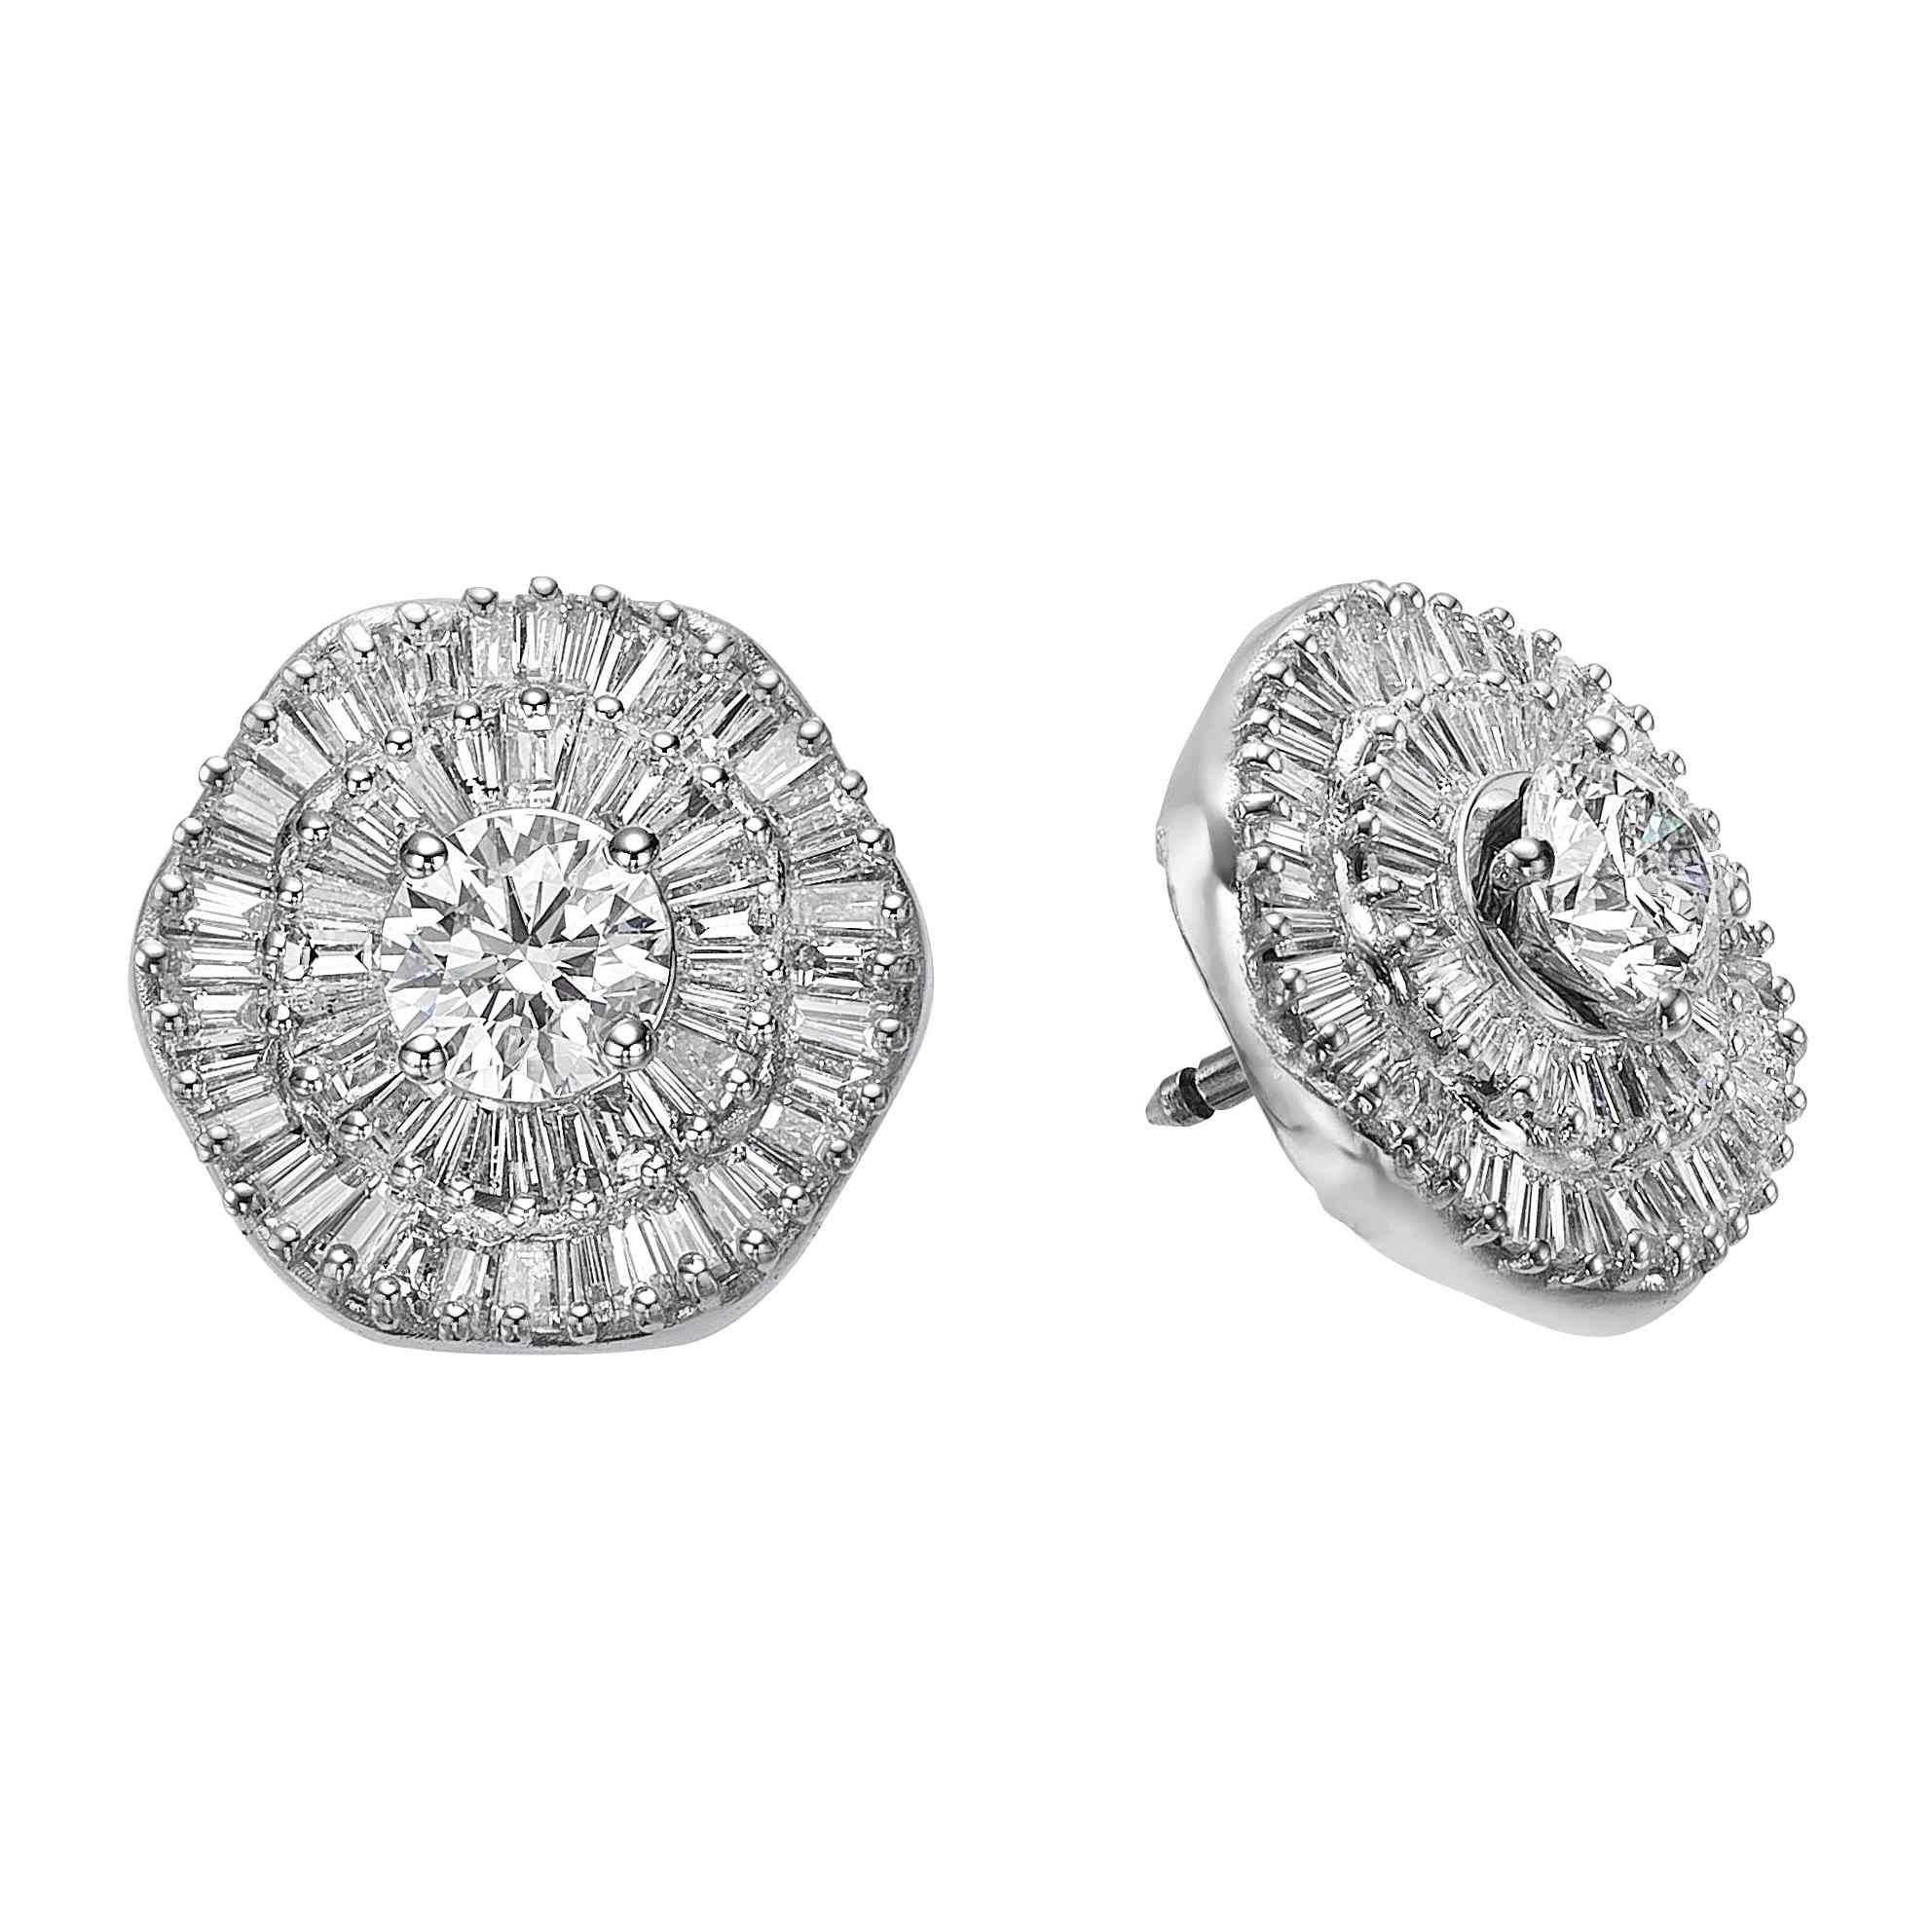 One of a kind Interchangeable earring diamond set which is accompanied with a timeless triple halo diamond ring. 
Our hand crafted set is staring GIA certified Interchangeable Double Halo Ballerina style pair of diamond earrings 4.66 Carat TDW & GIA